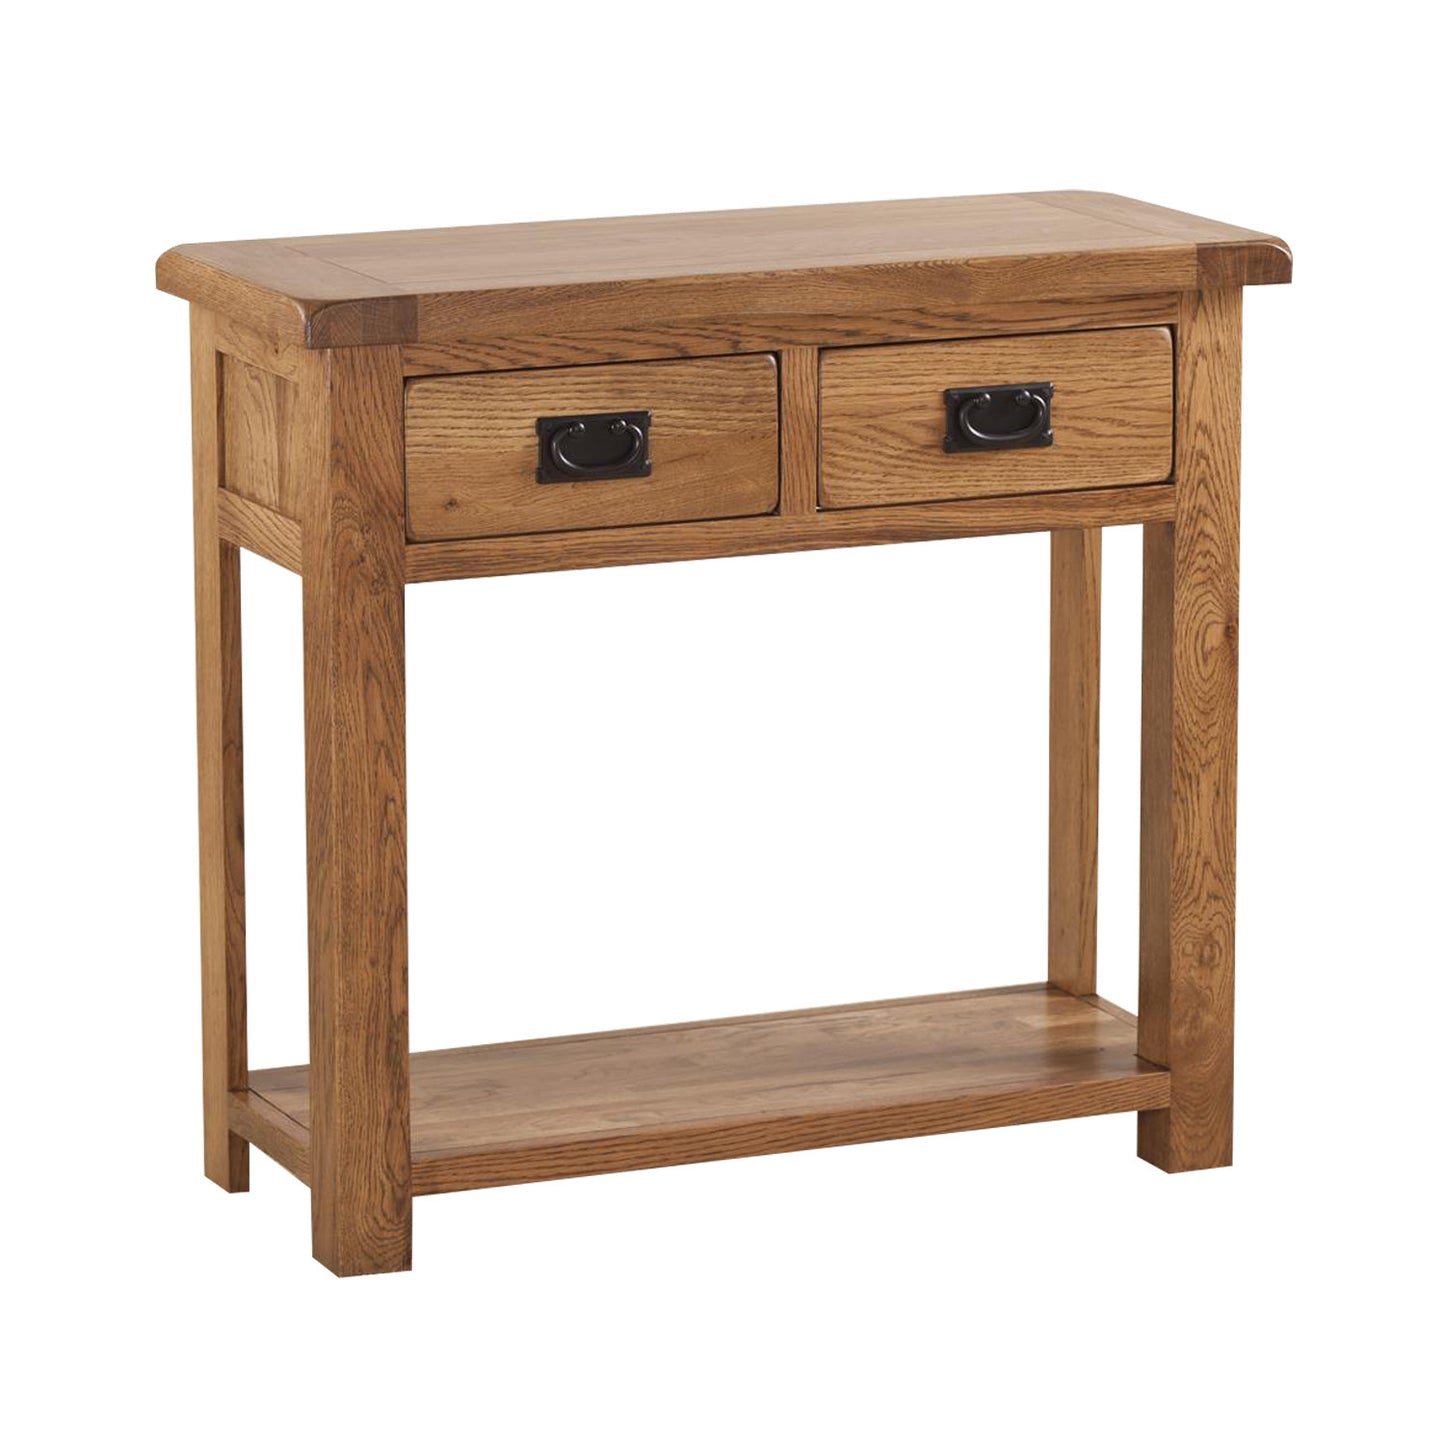 Auvergne Solid Oak Console Table - 2 Drawer - Better Furniture Norwich & Great Yarmouth